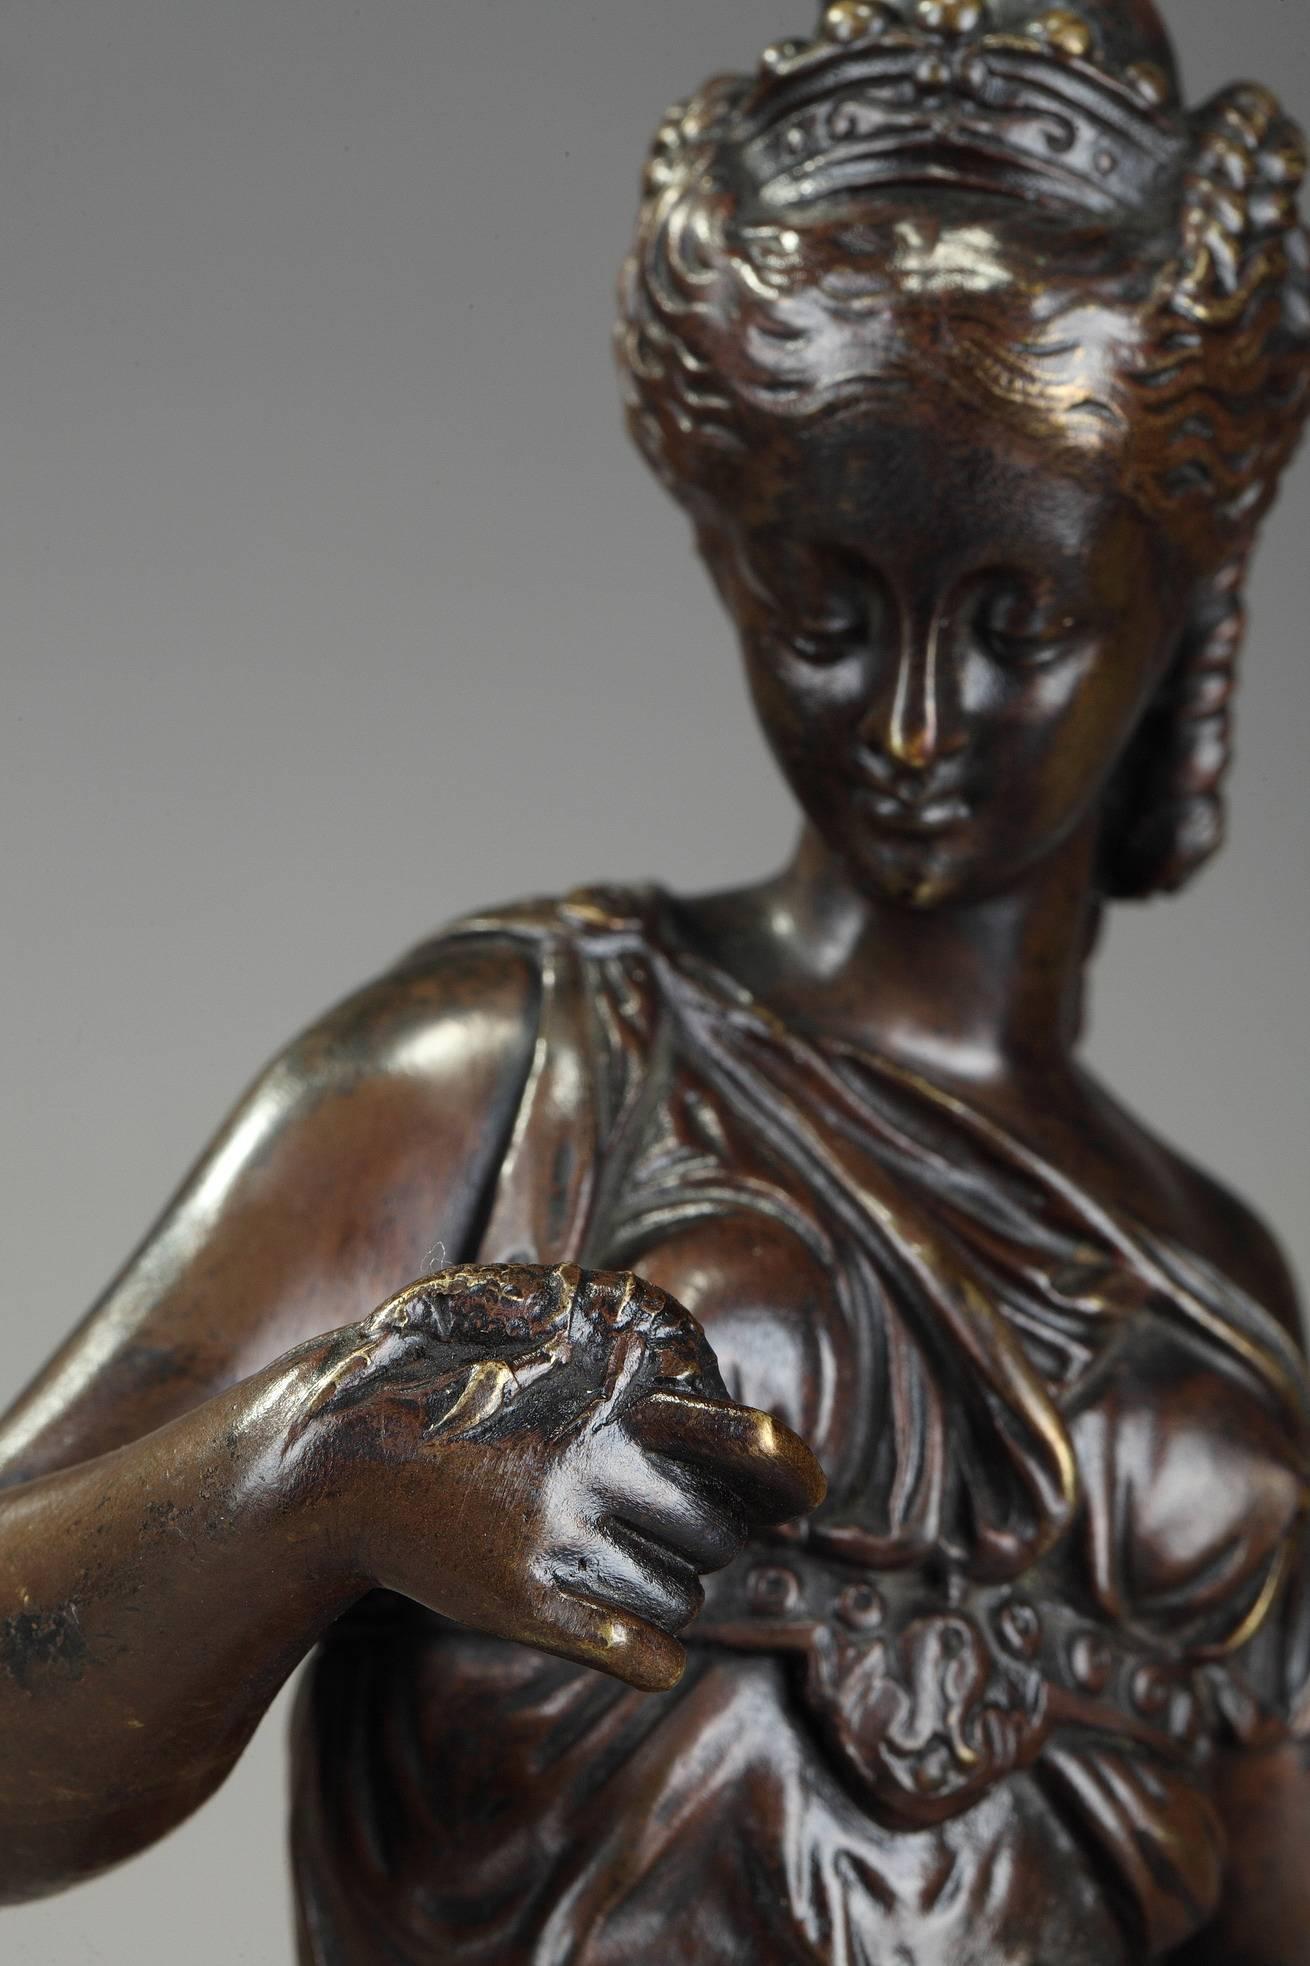 Napoleon III mantel clock decorated with a patinated bronze sculpture featuring a woman wearing a flowing robe, holding a fishing net and looking at a shrimp on her hand. Signed on the base: Paul Dubois. The sculpture is resting on a dark wooden